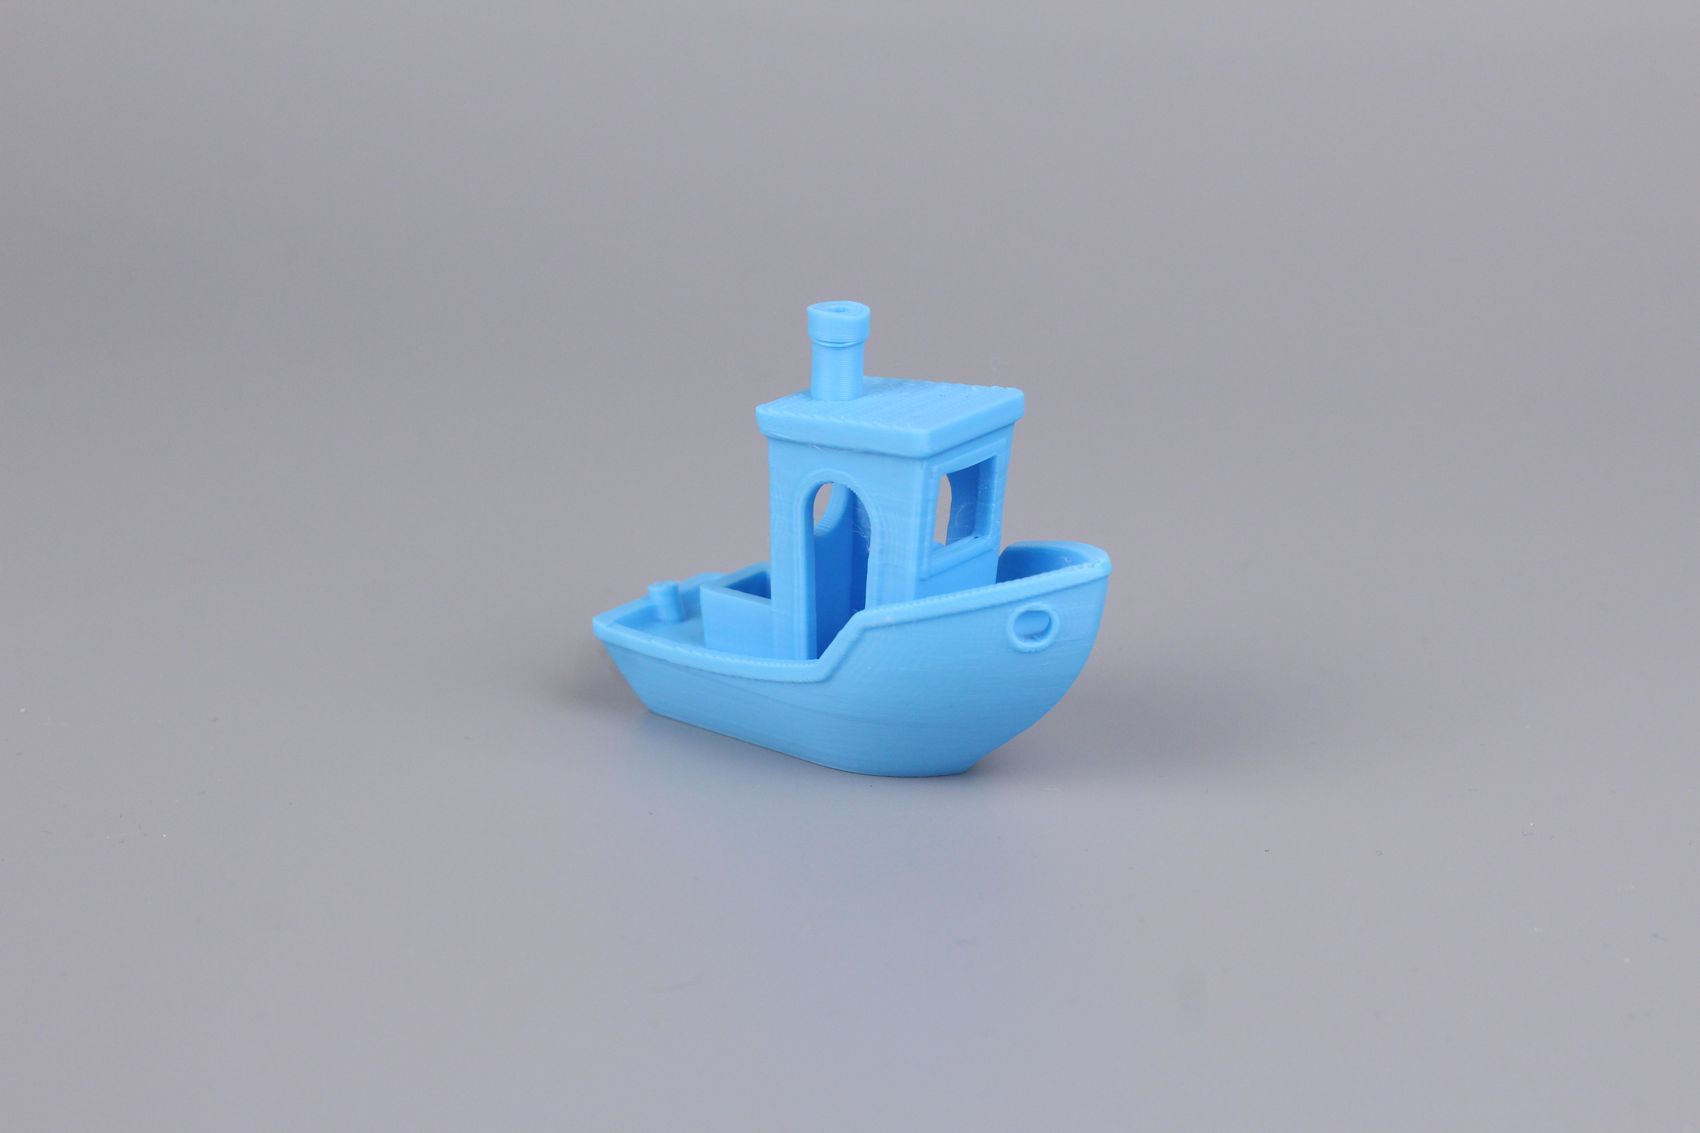 Ender 5 S1 Review 3D benchy1 | Creality Ender-5 S1 Review: Is it a worthy upgrade?